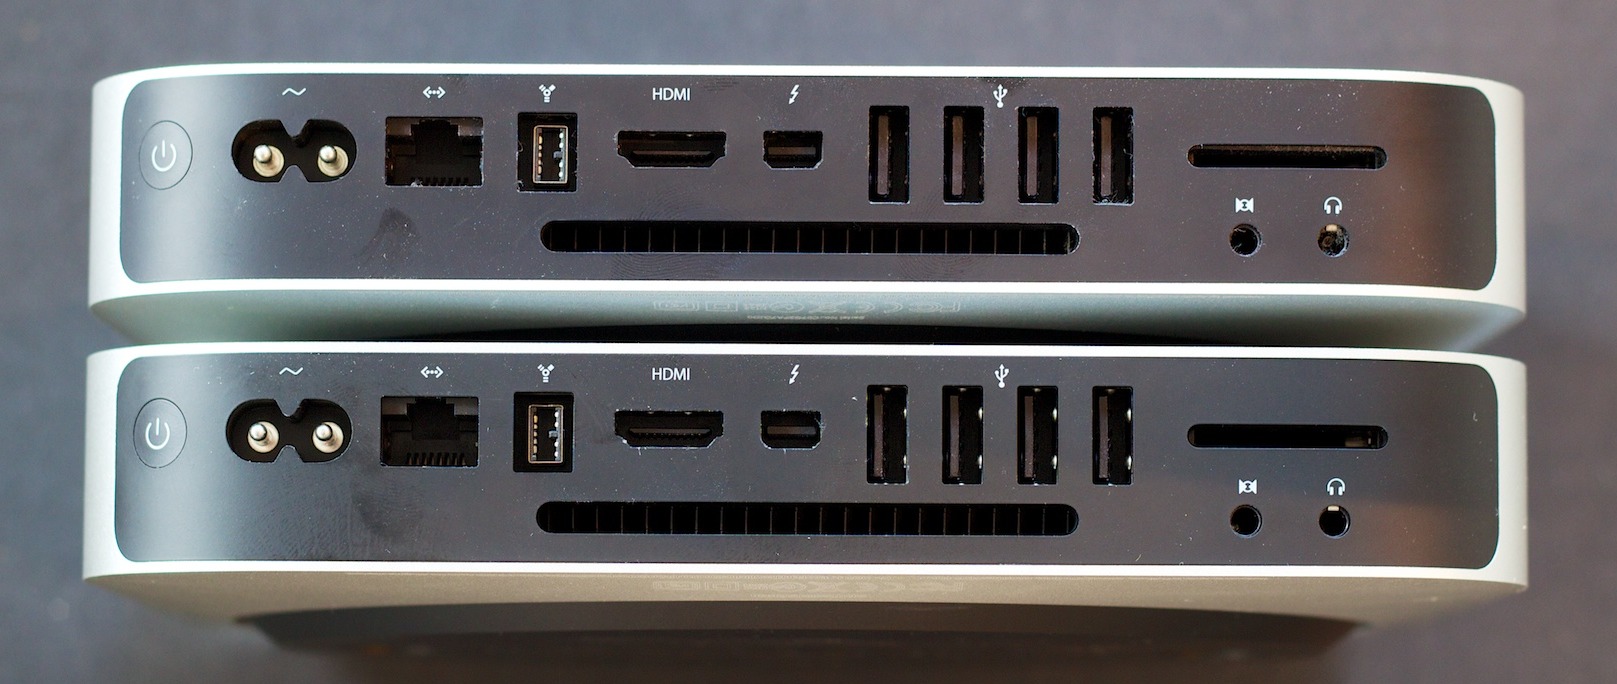 Review The Mac Mini Takes The Ivy Bridge To Fusion Town Ars Technica